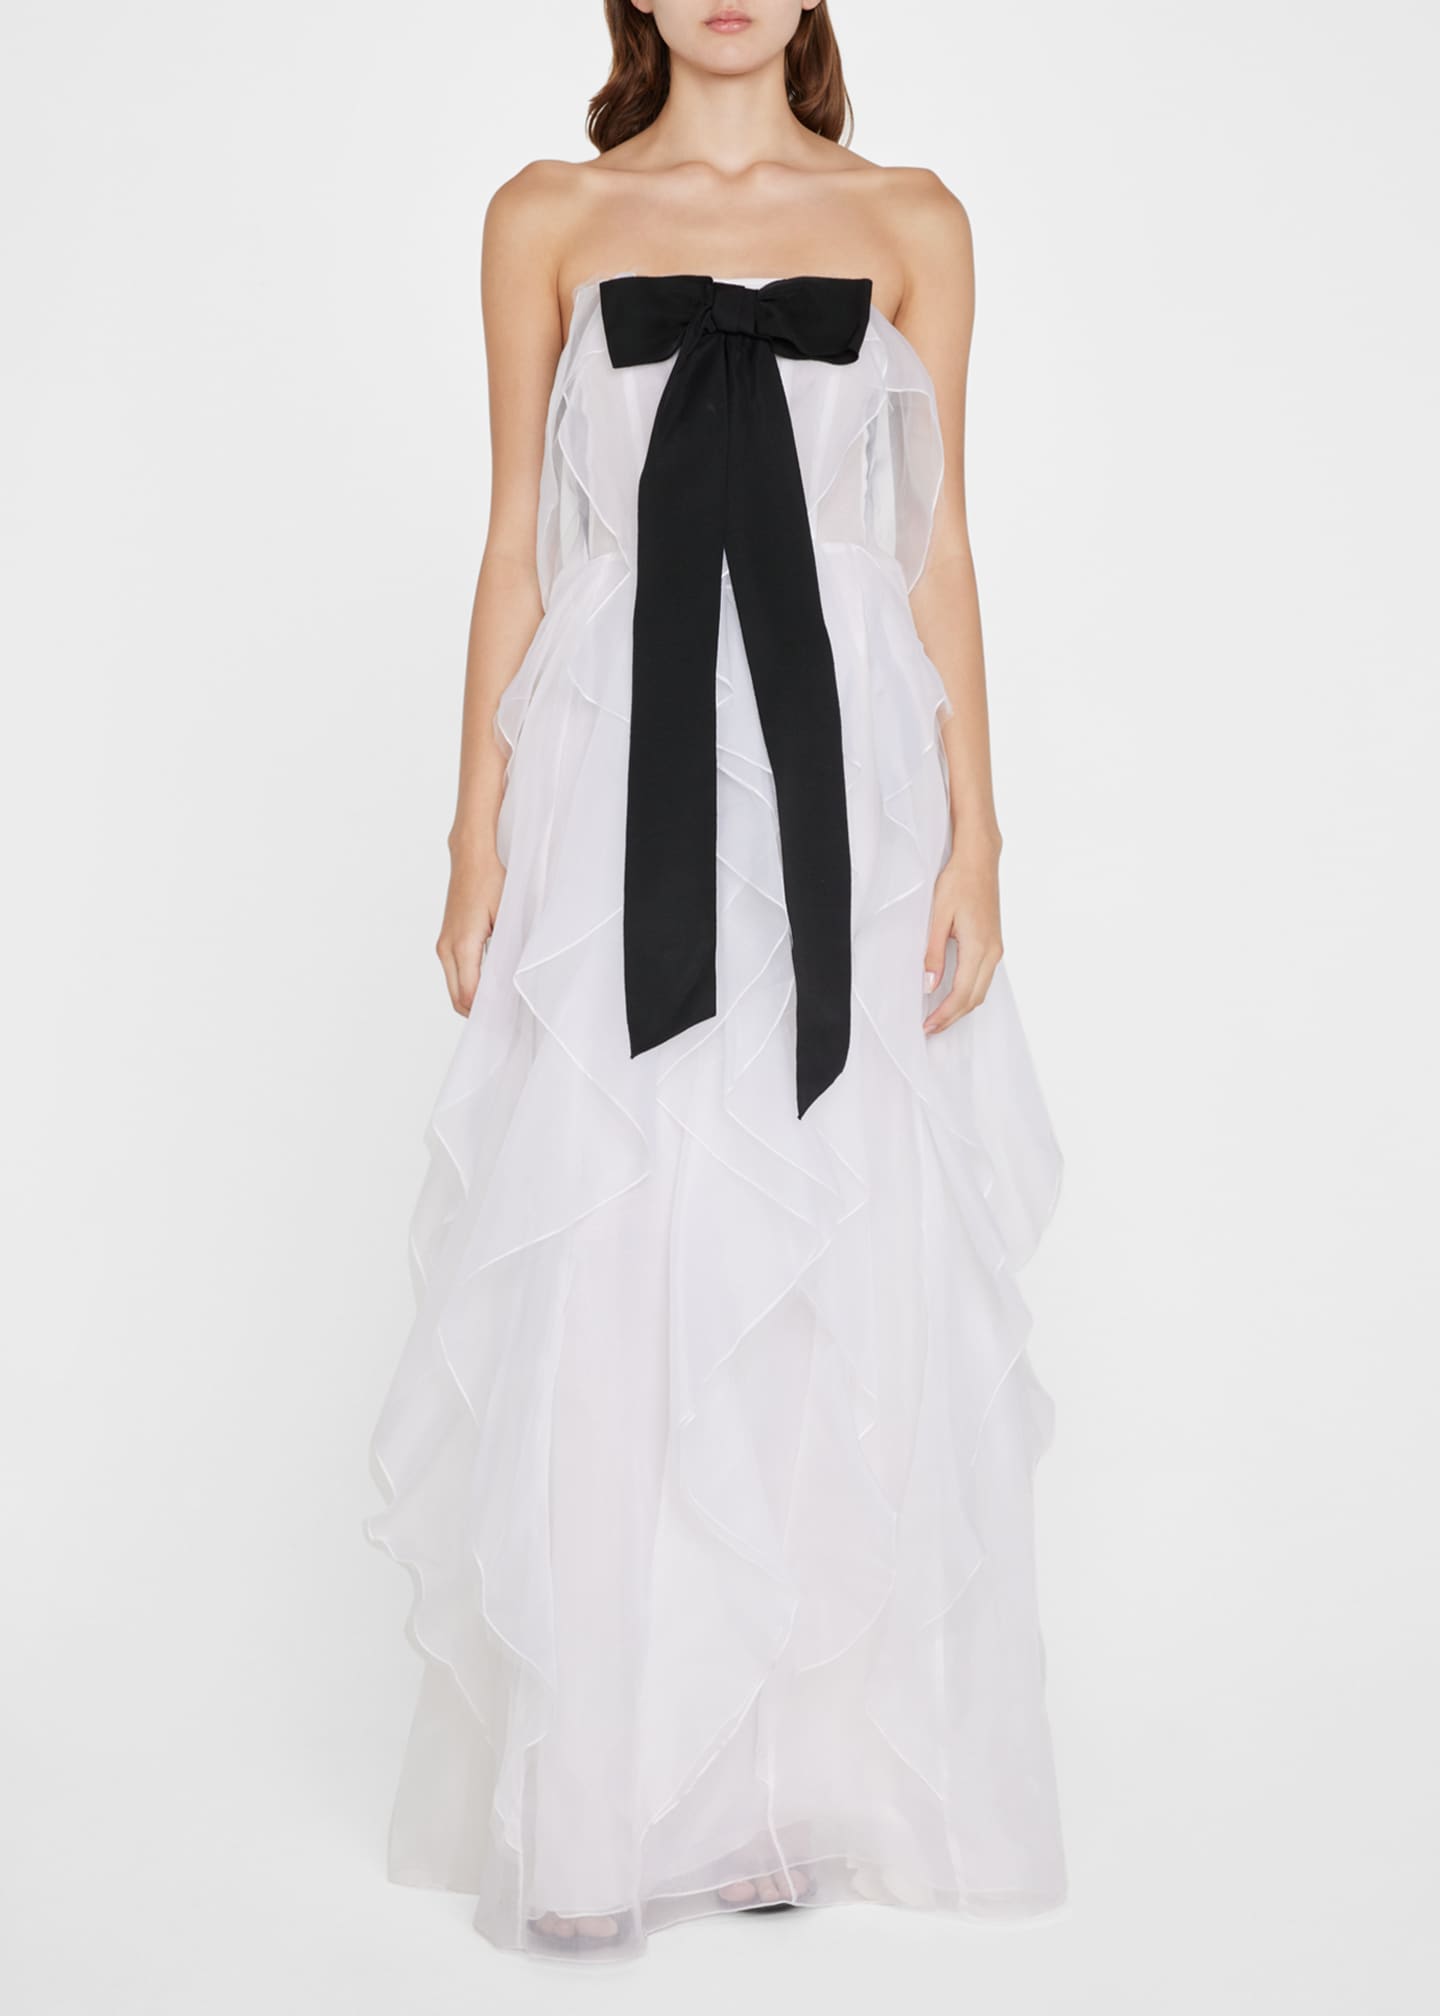 Cascading Ruffle Gown w/ Bow